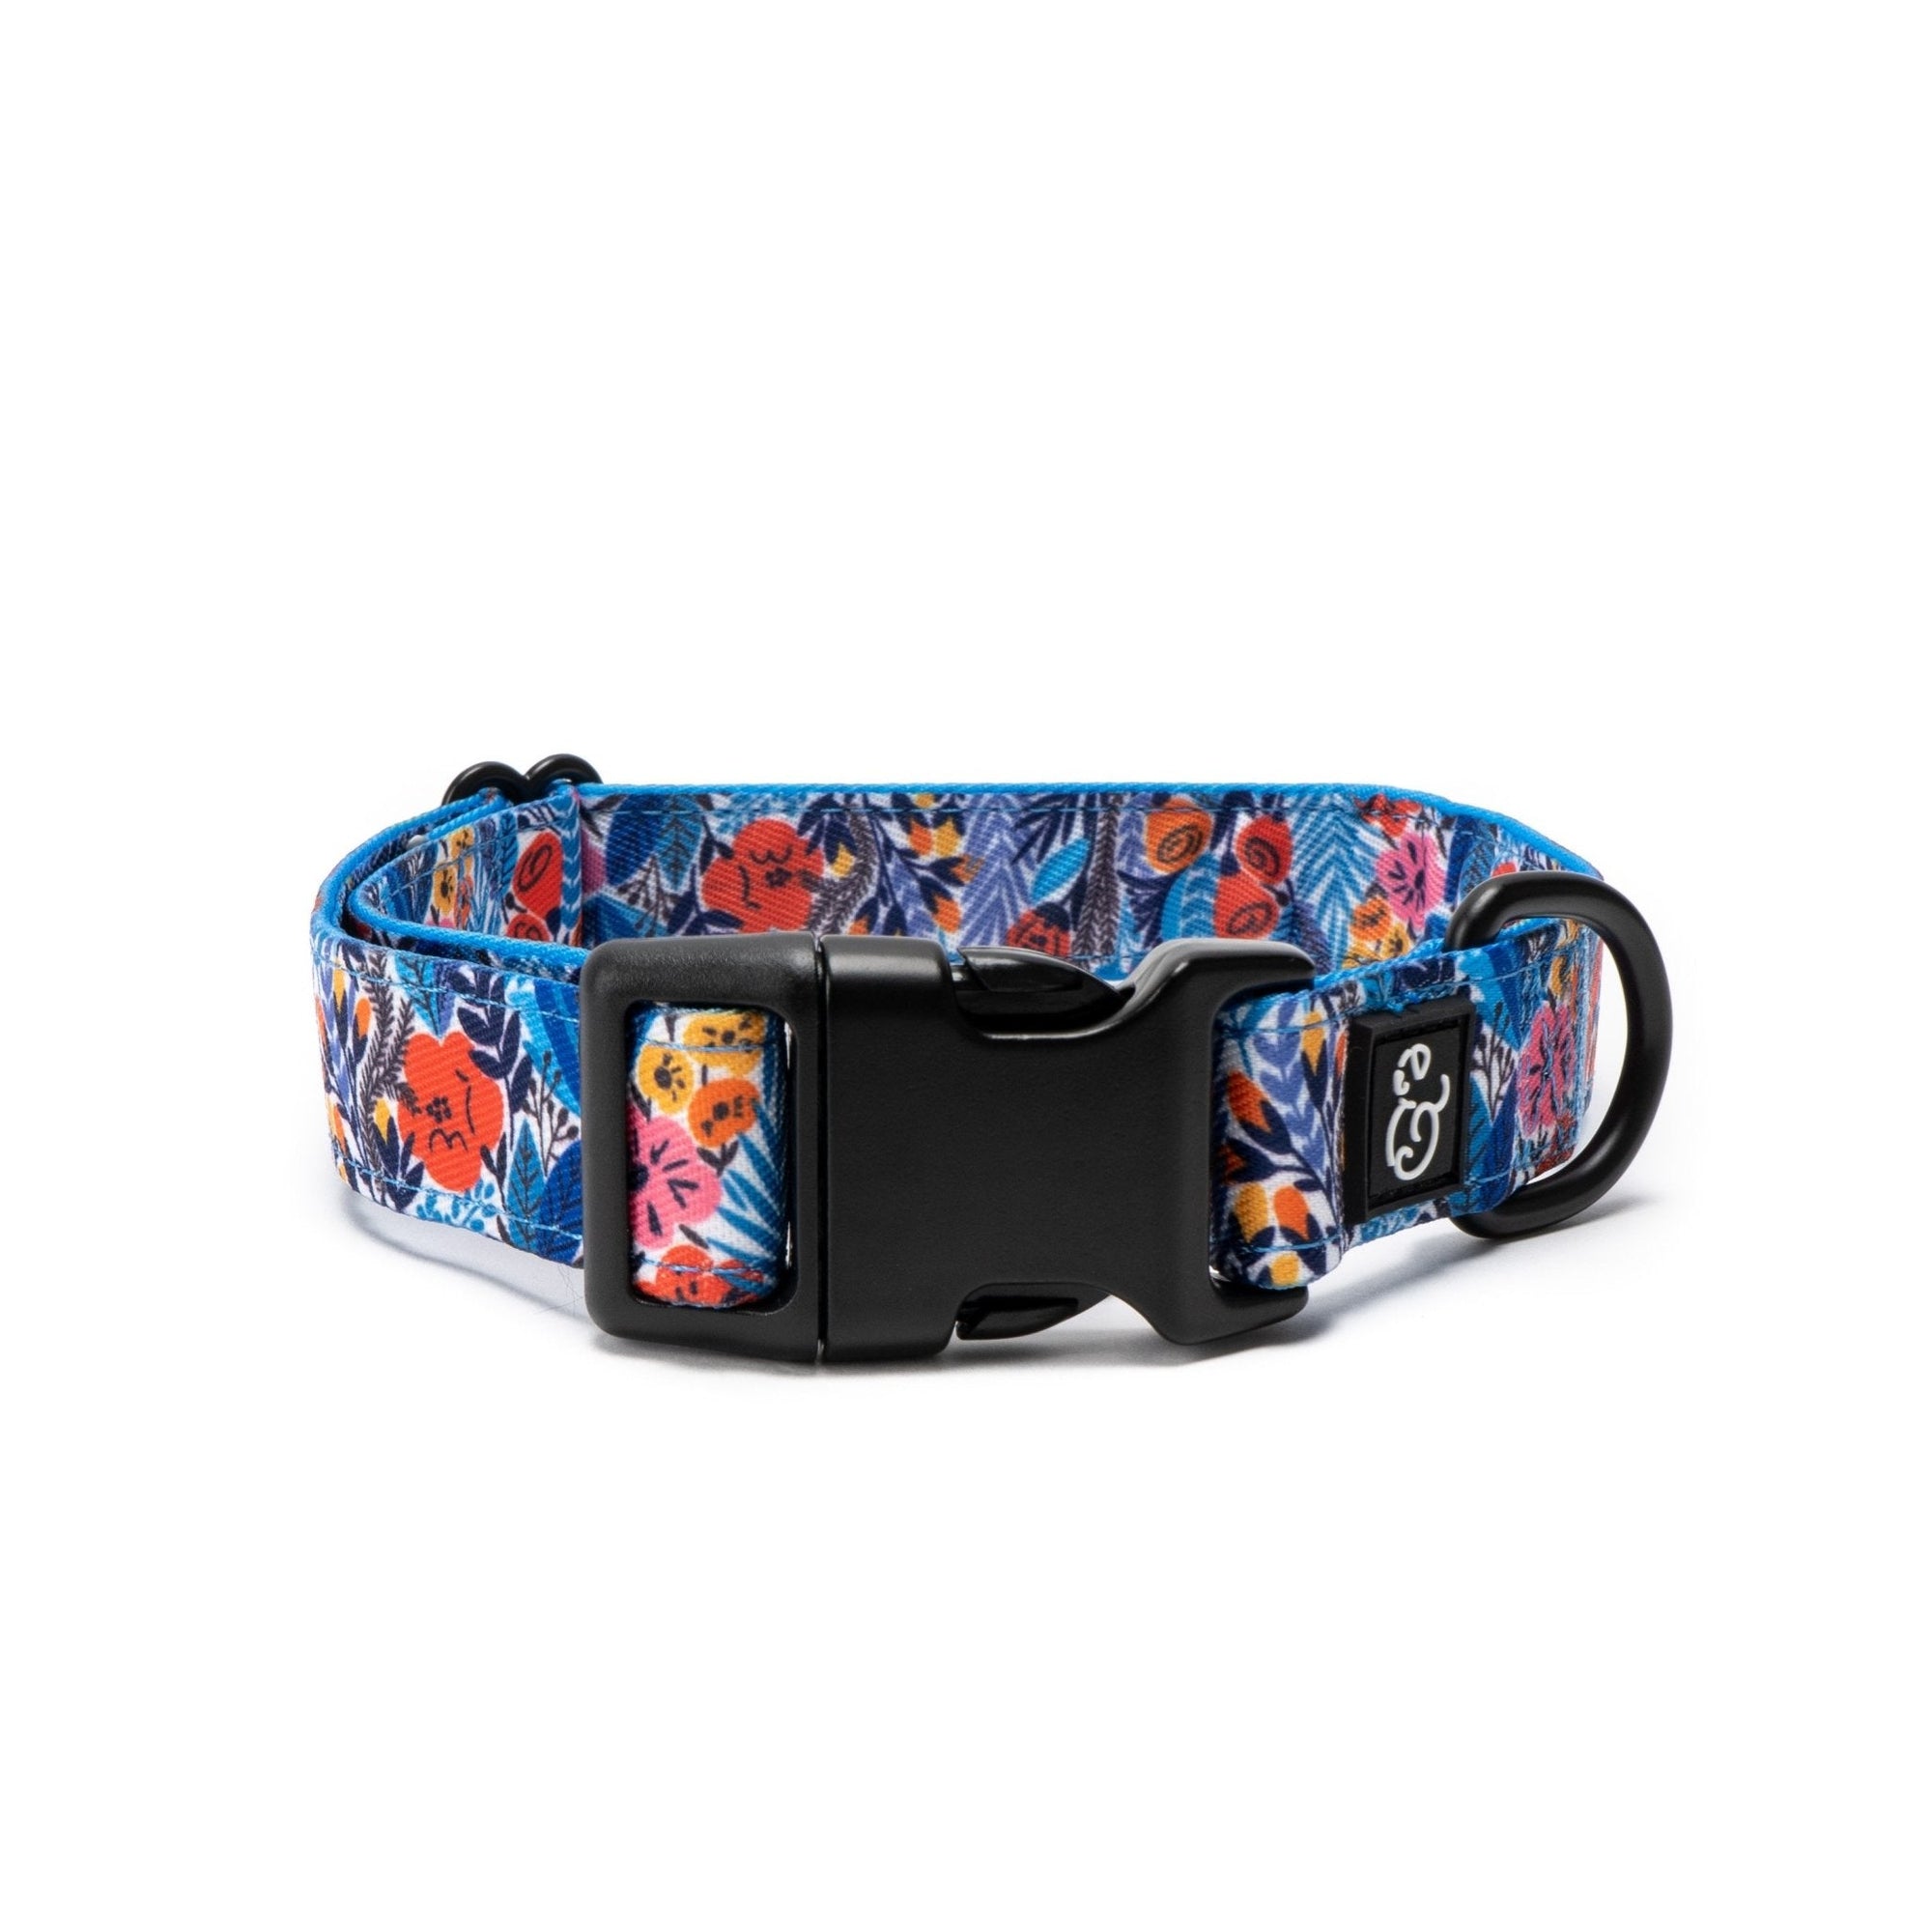 Lucy & Co. Royal Garden - Blue with Flowers - Adjustable Buckle Clip Dog Collar